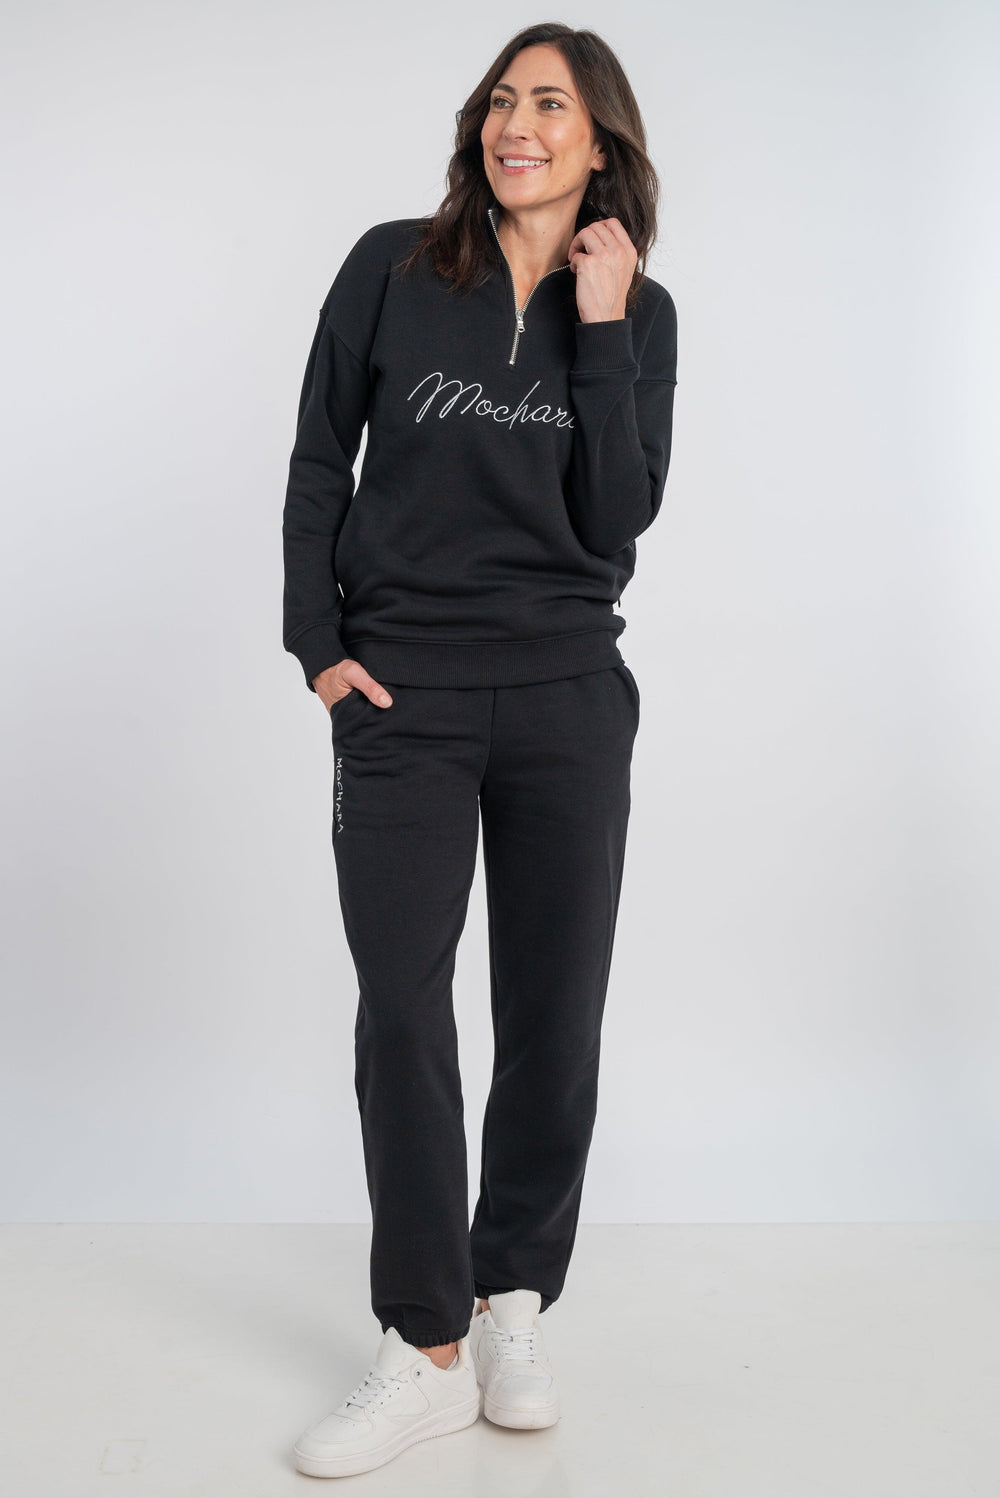 Mochara Joggers in Black Luxe Edition